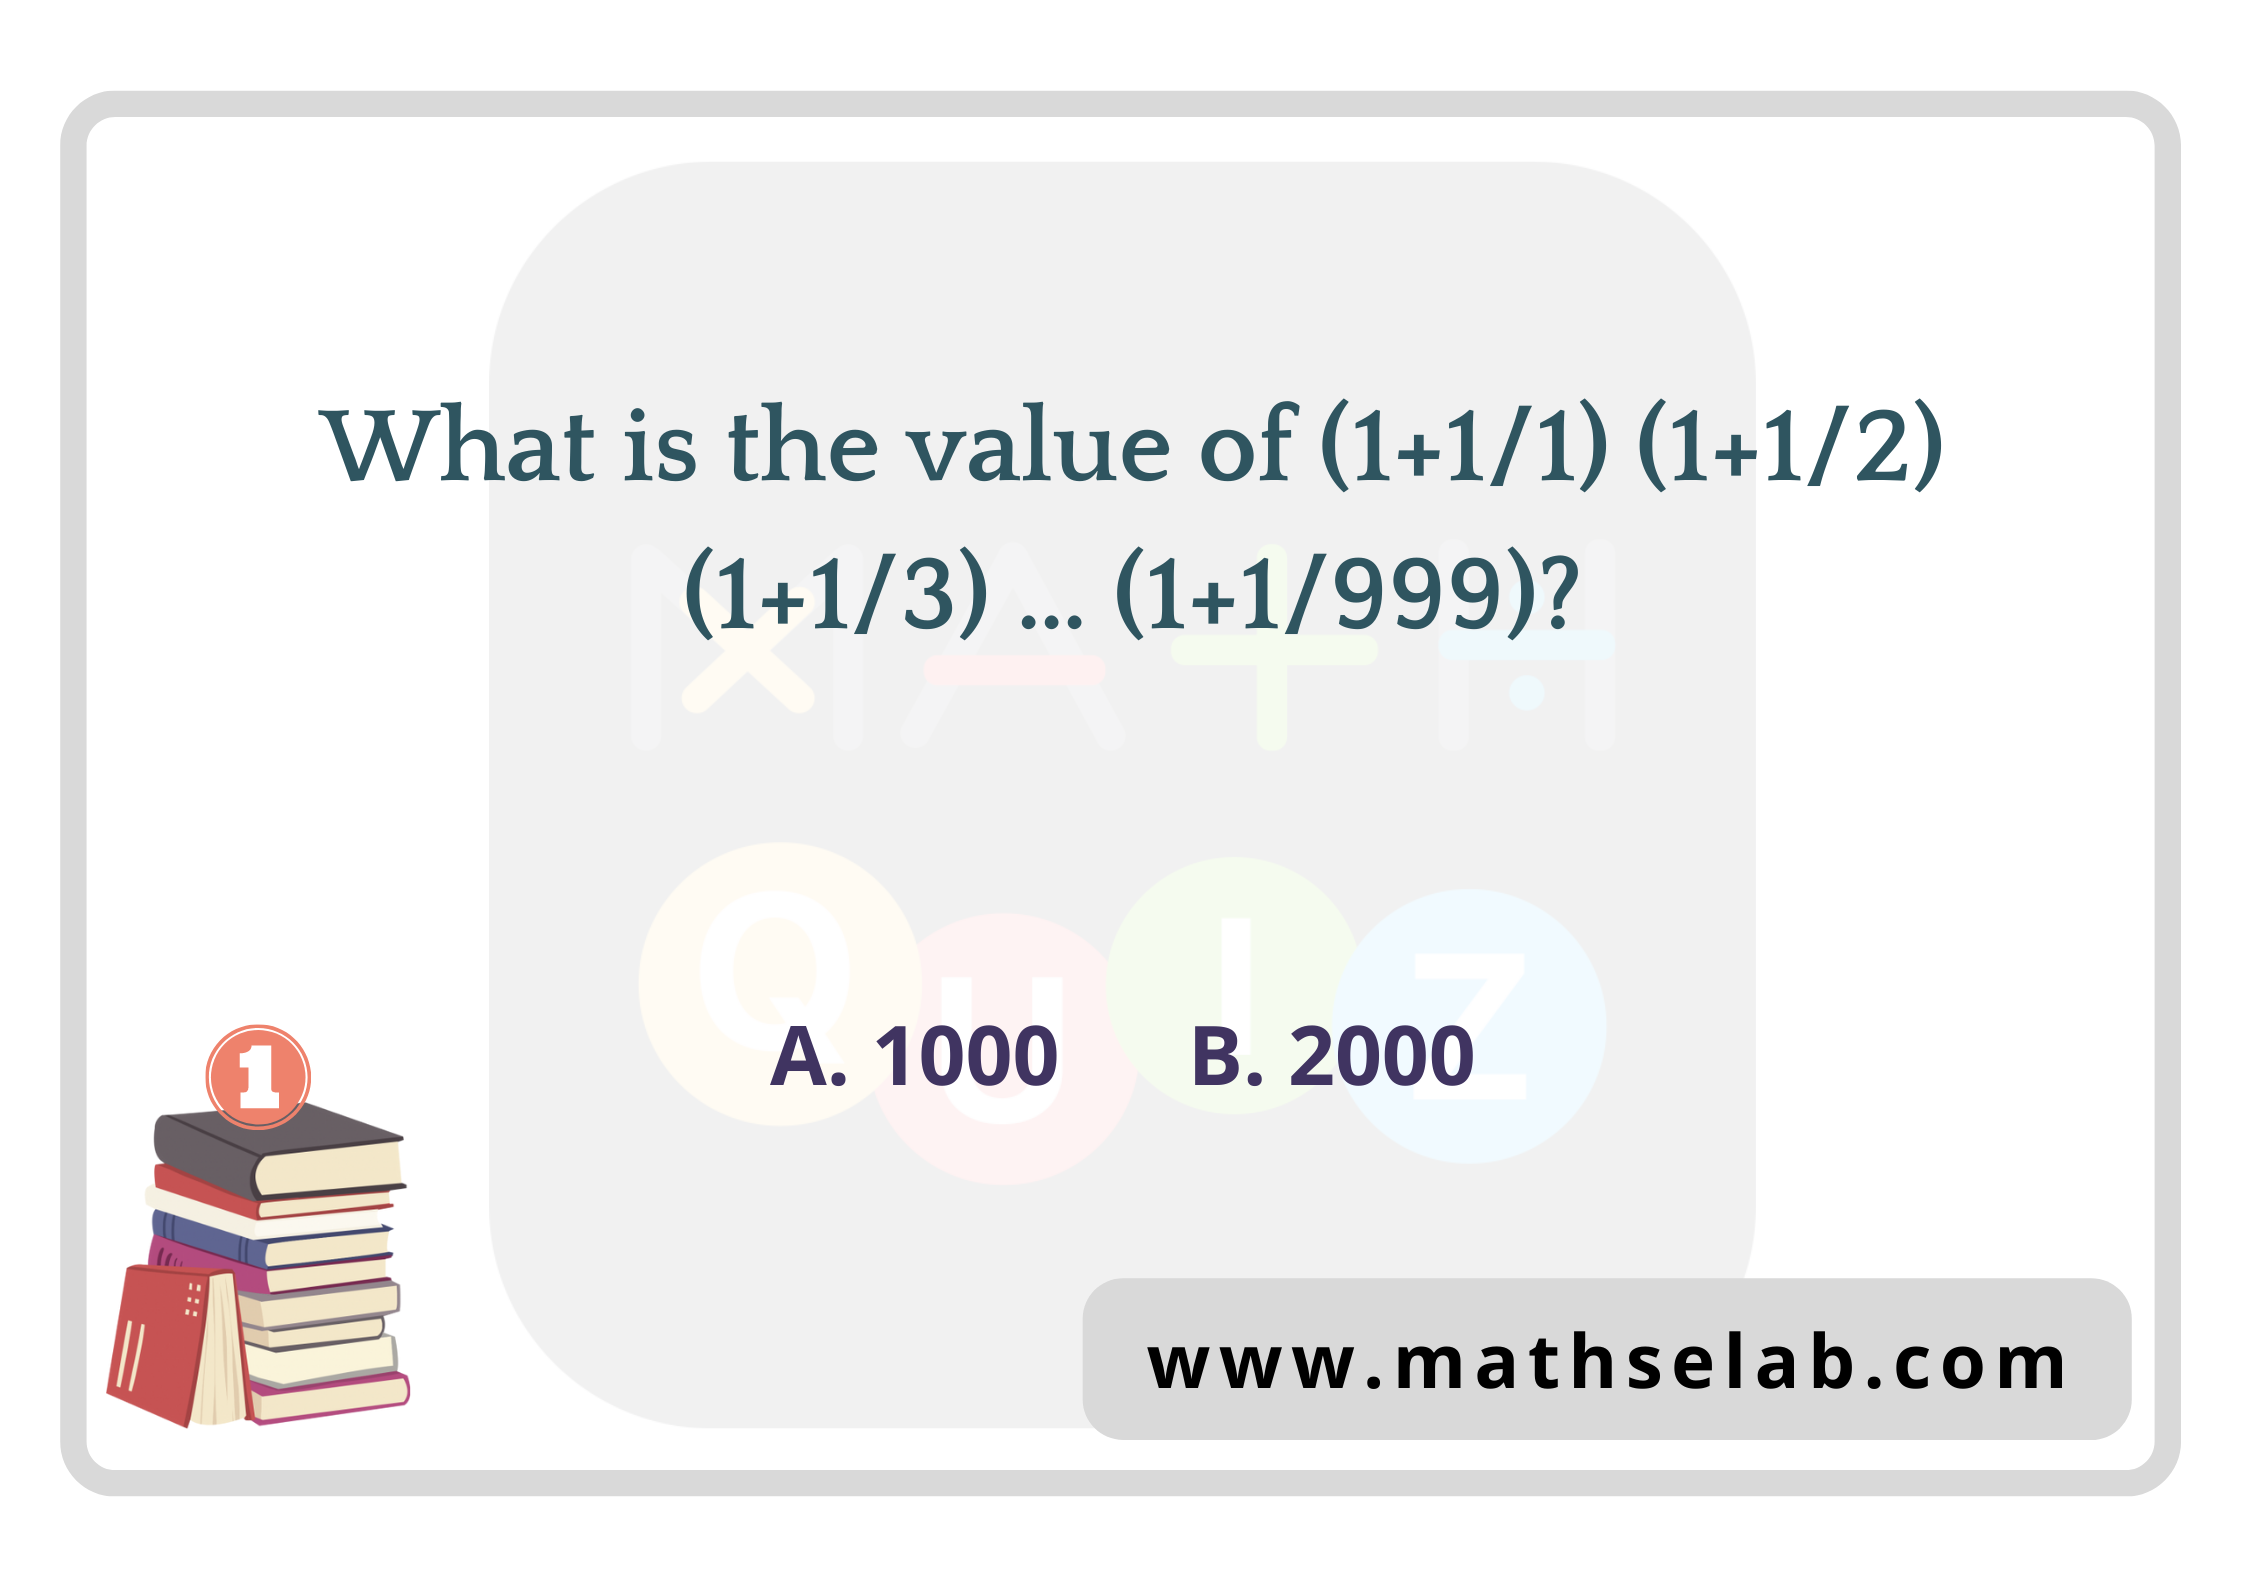 What is the value of (1+1/1) (1+1/2) (1+1/3) … (1+1/999) - mathselab.com